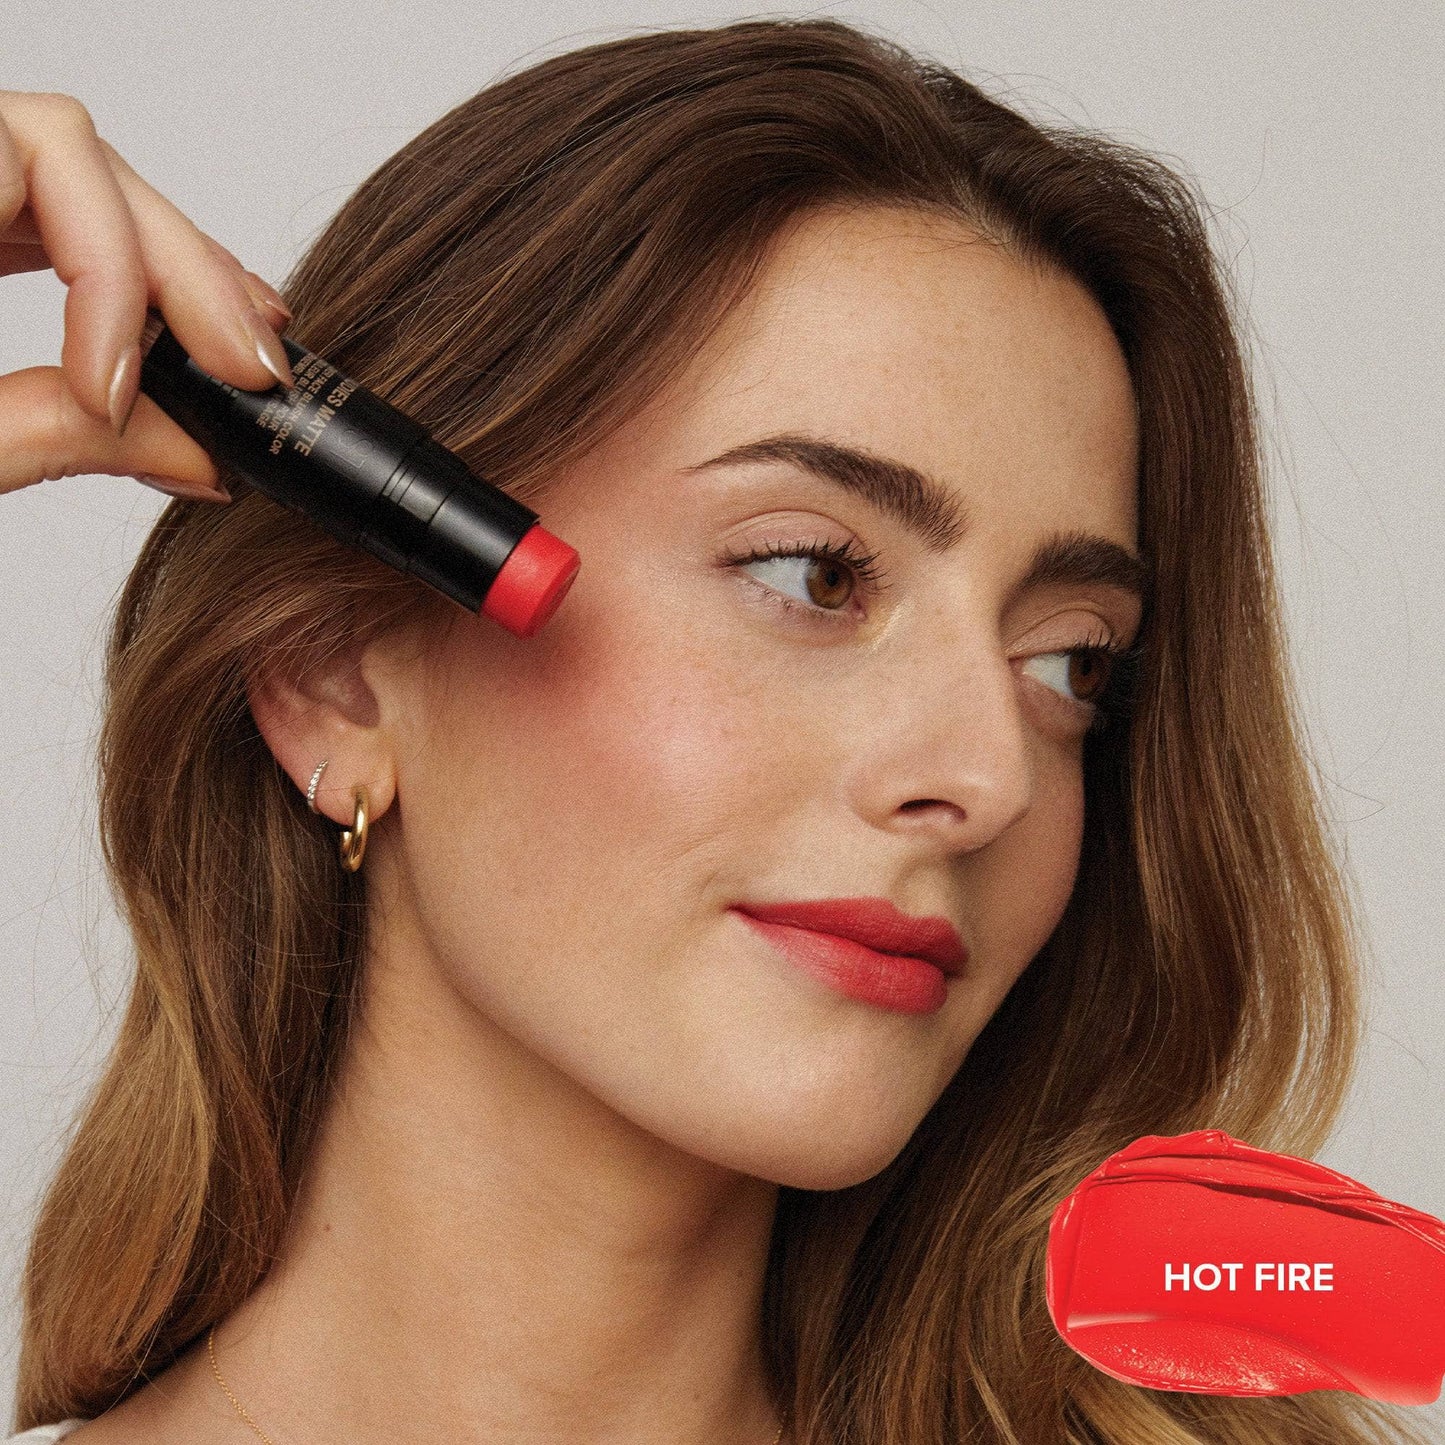 Taylor Frankel wearing Nudies Blush Stick in shade Hot Fire